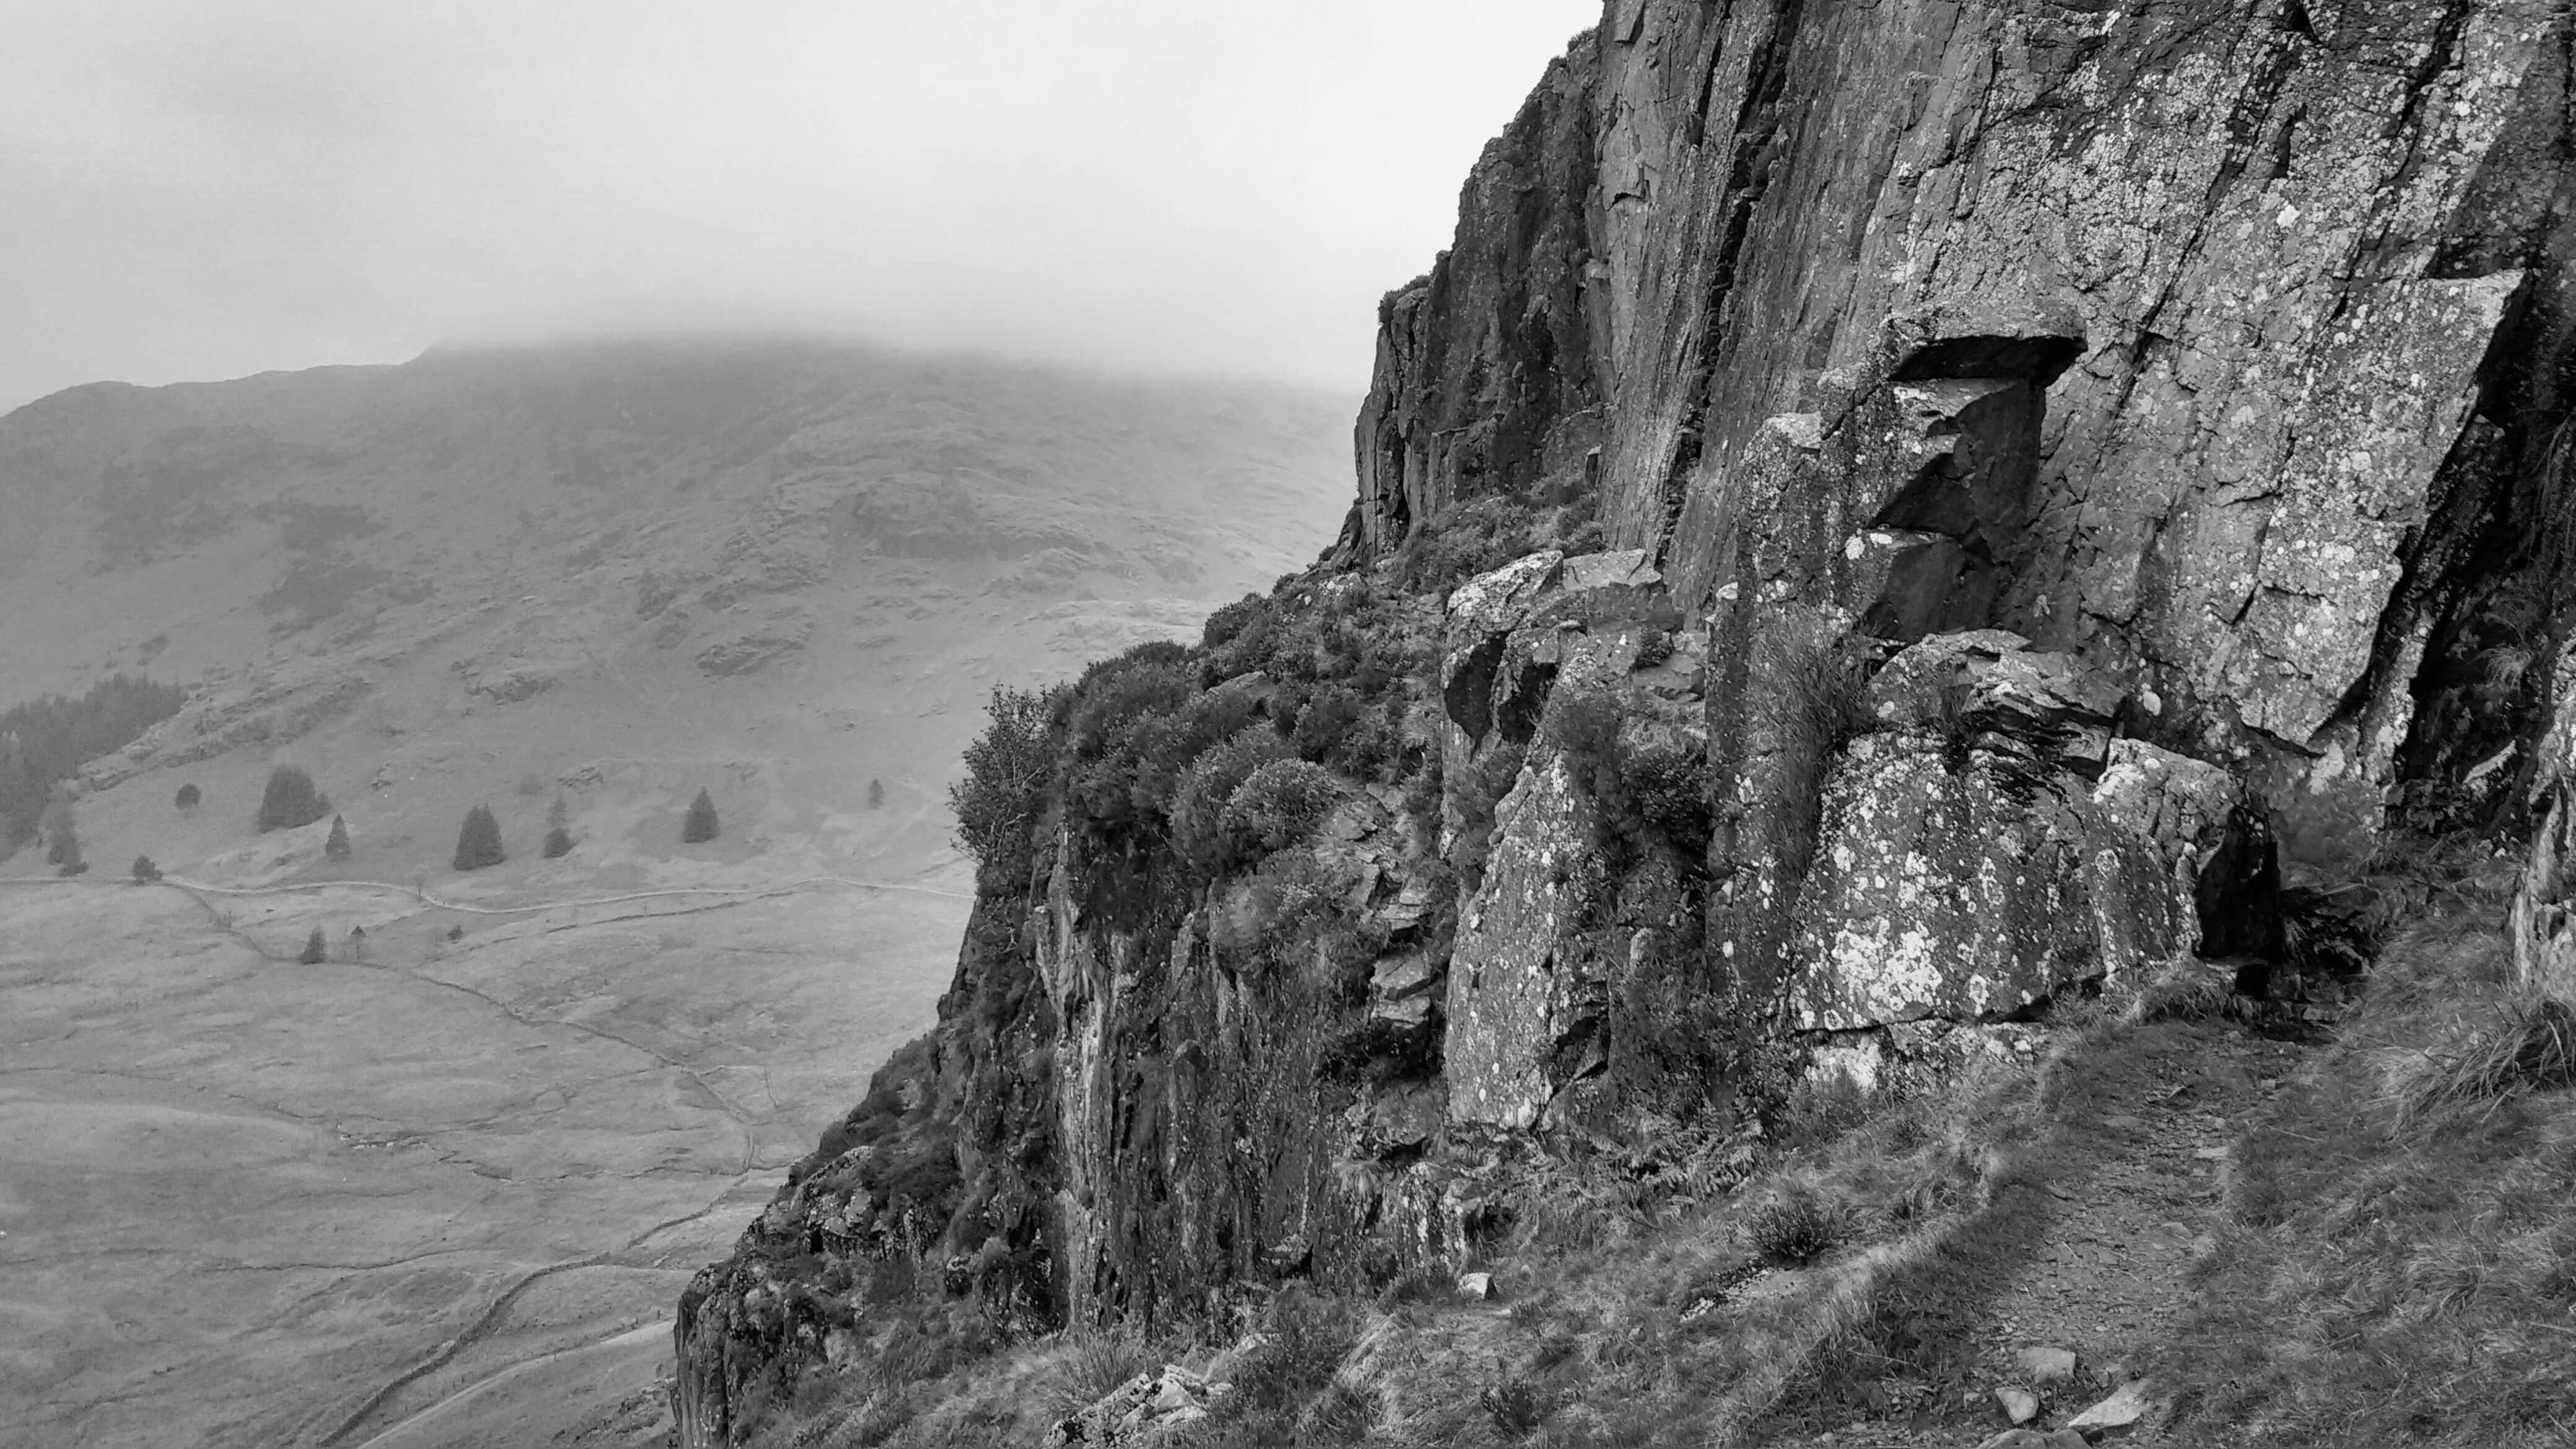 A high rocky outcrop on the side of a fell